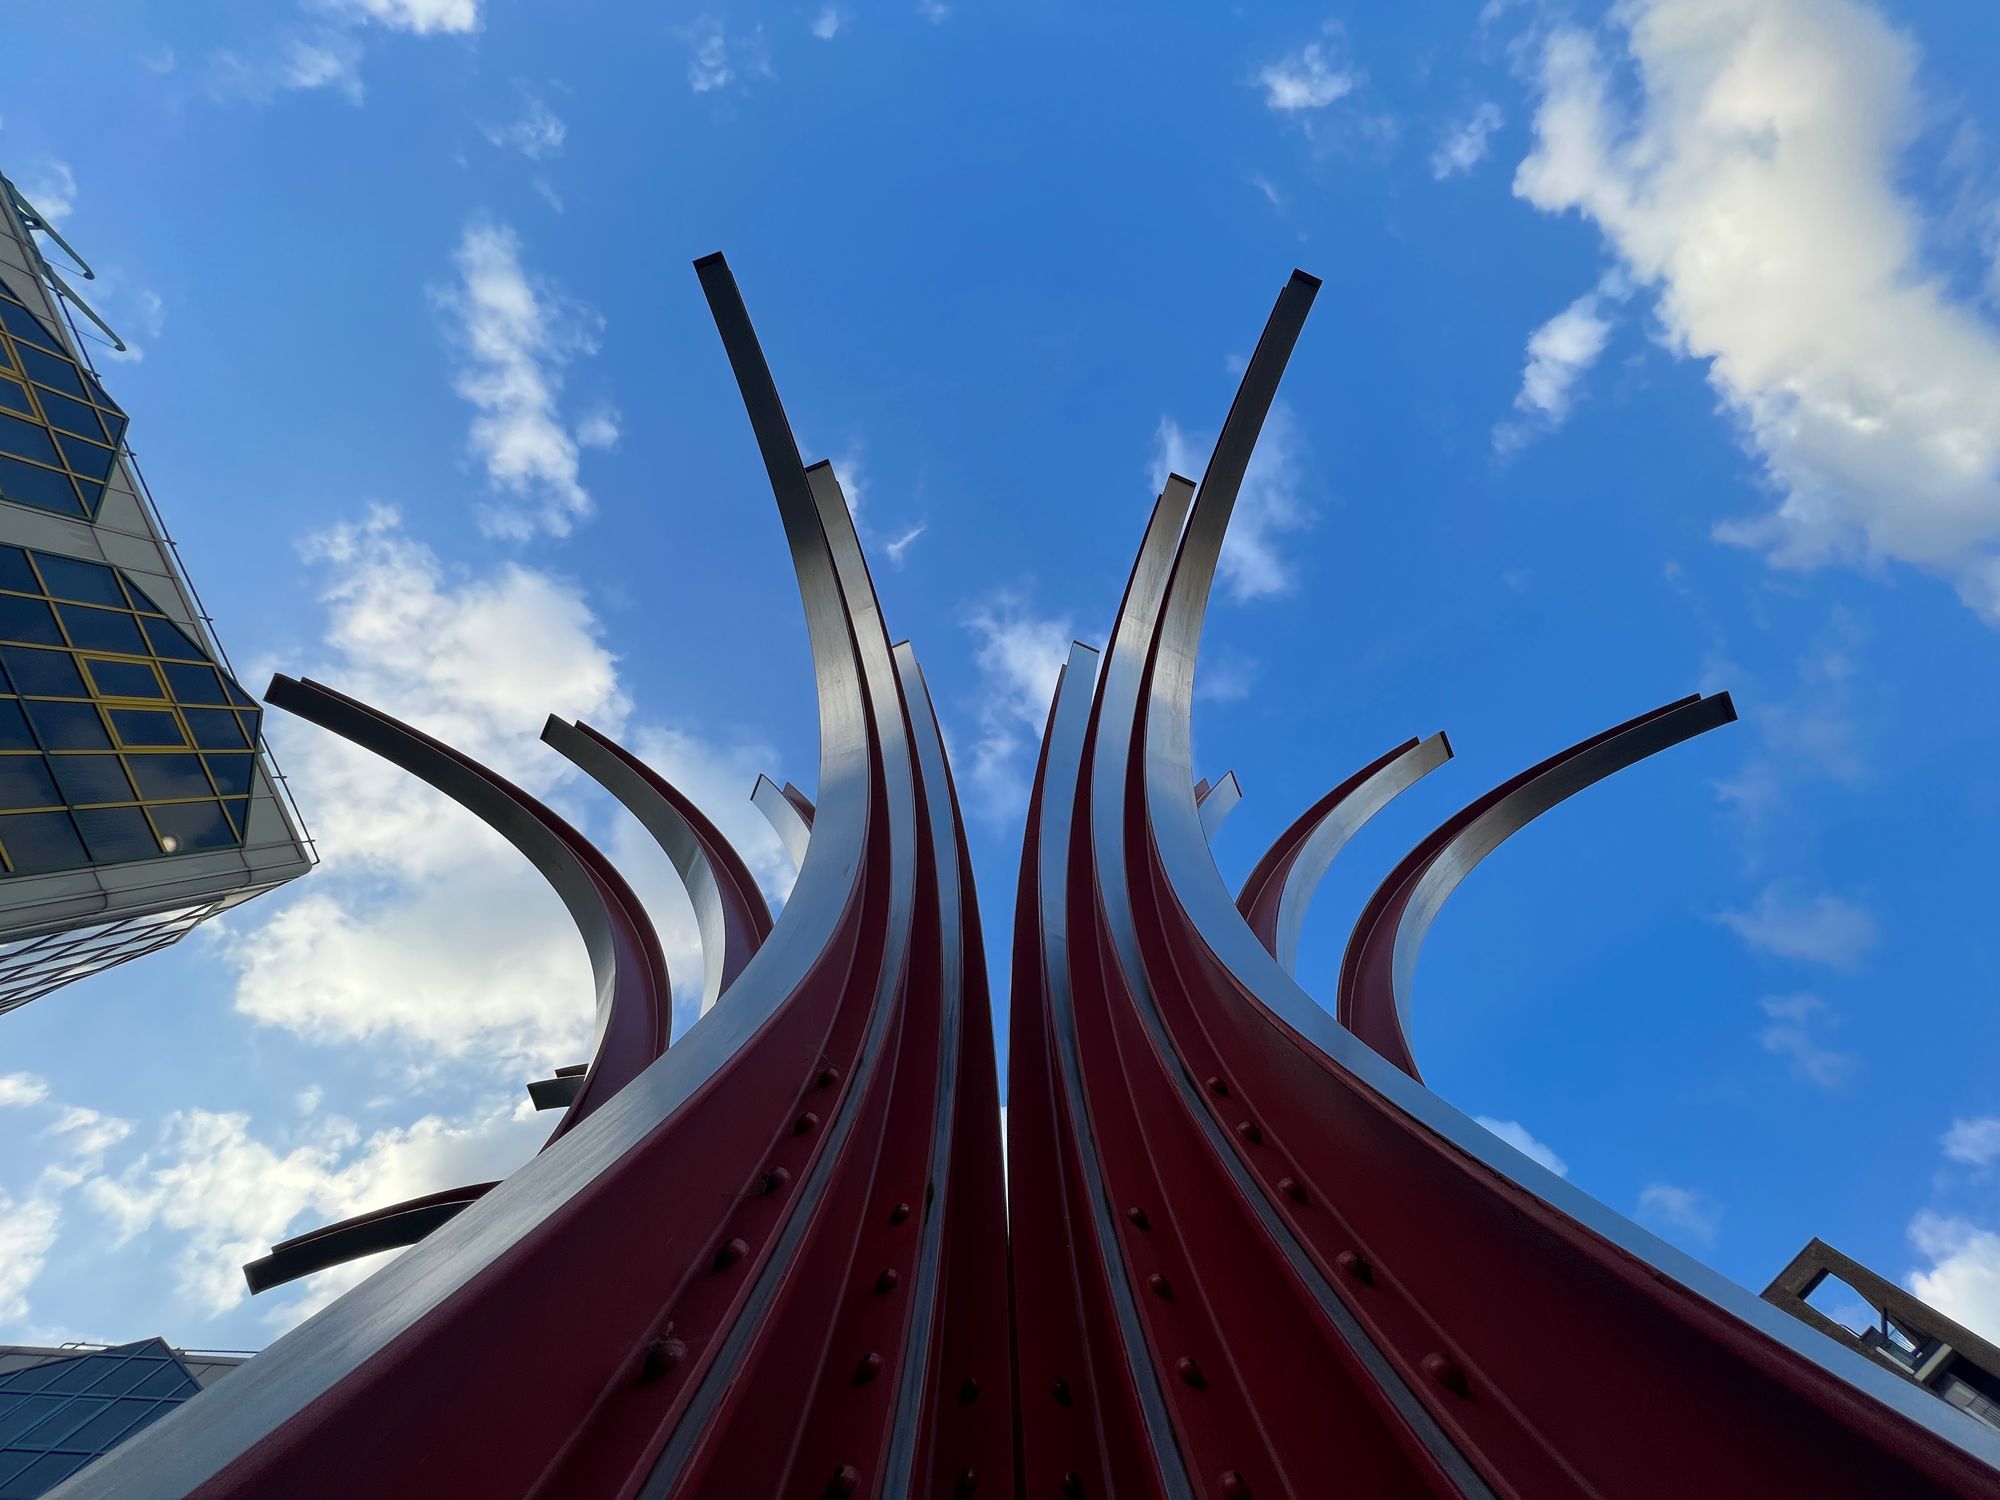 A sculpture made of rails curving upwards in a bunch rises into the sky amongst tall buildings.